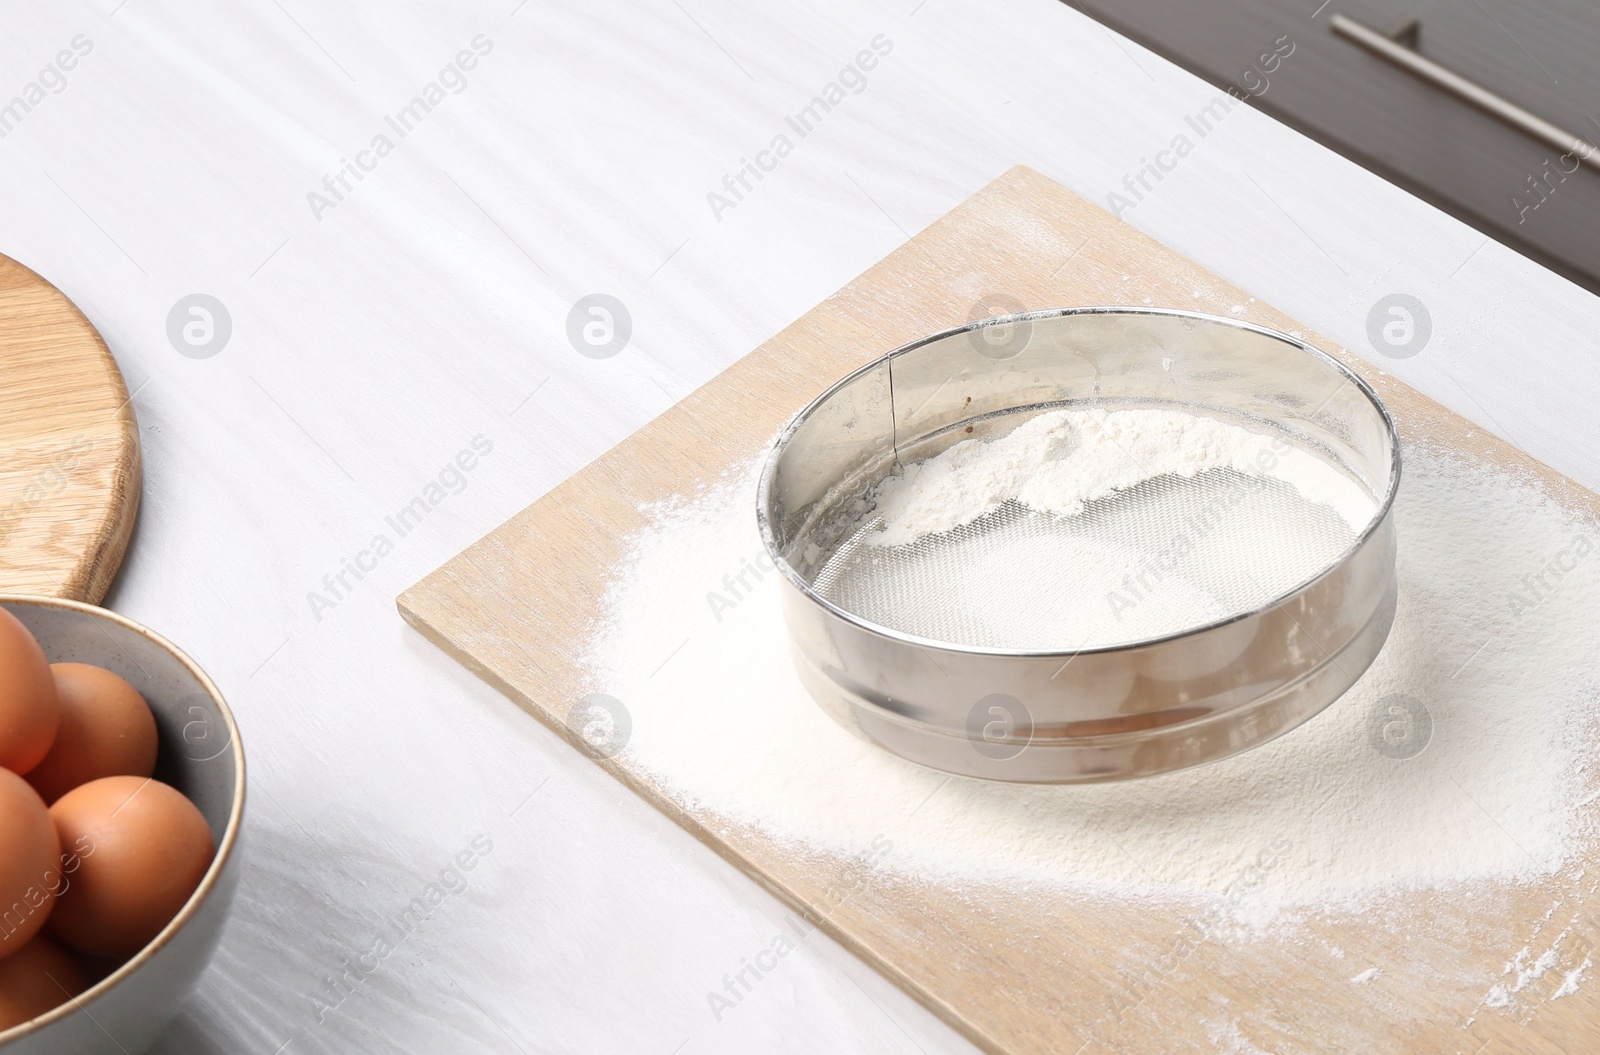 Photo of Sieve with flour, eggs and rolling pin on table in kitchen